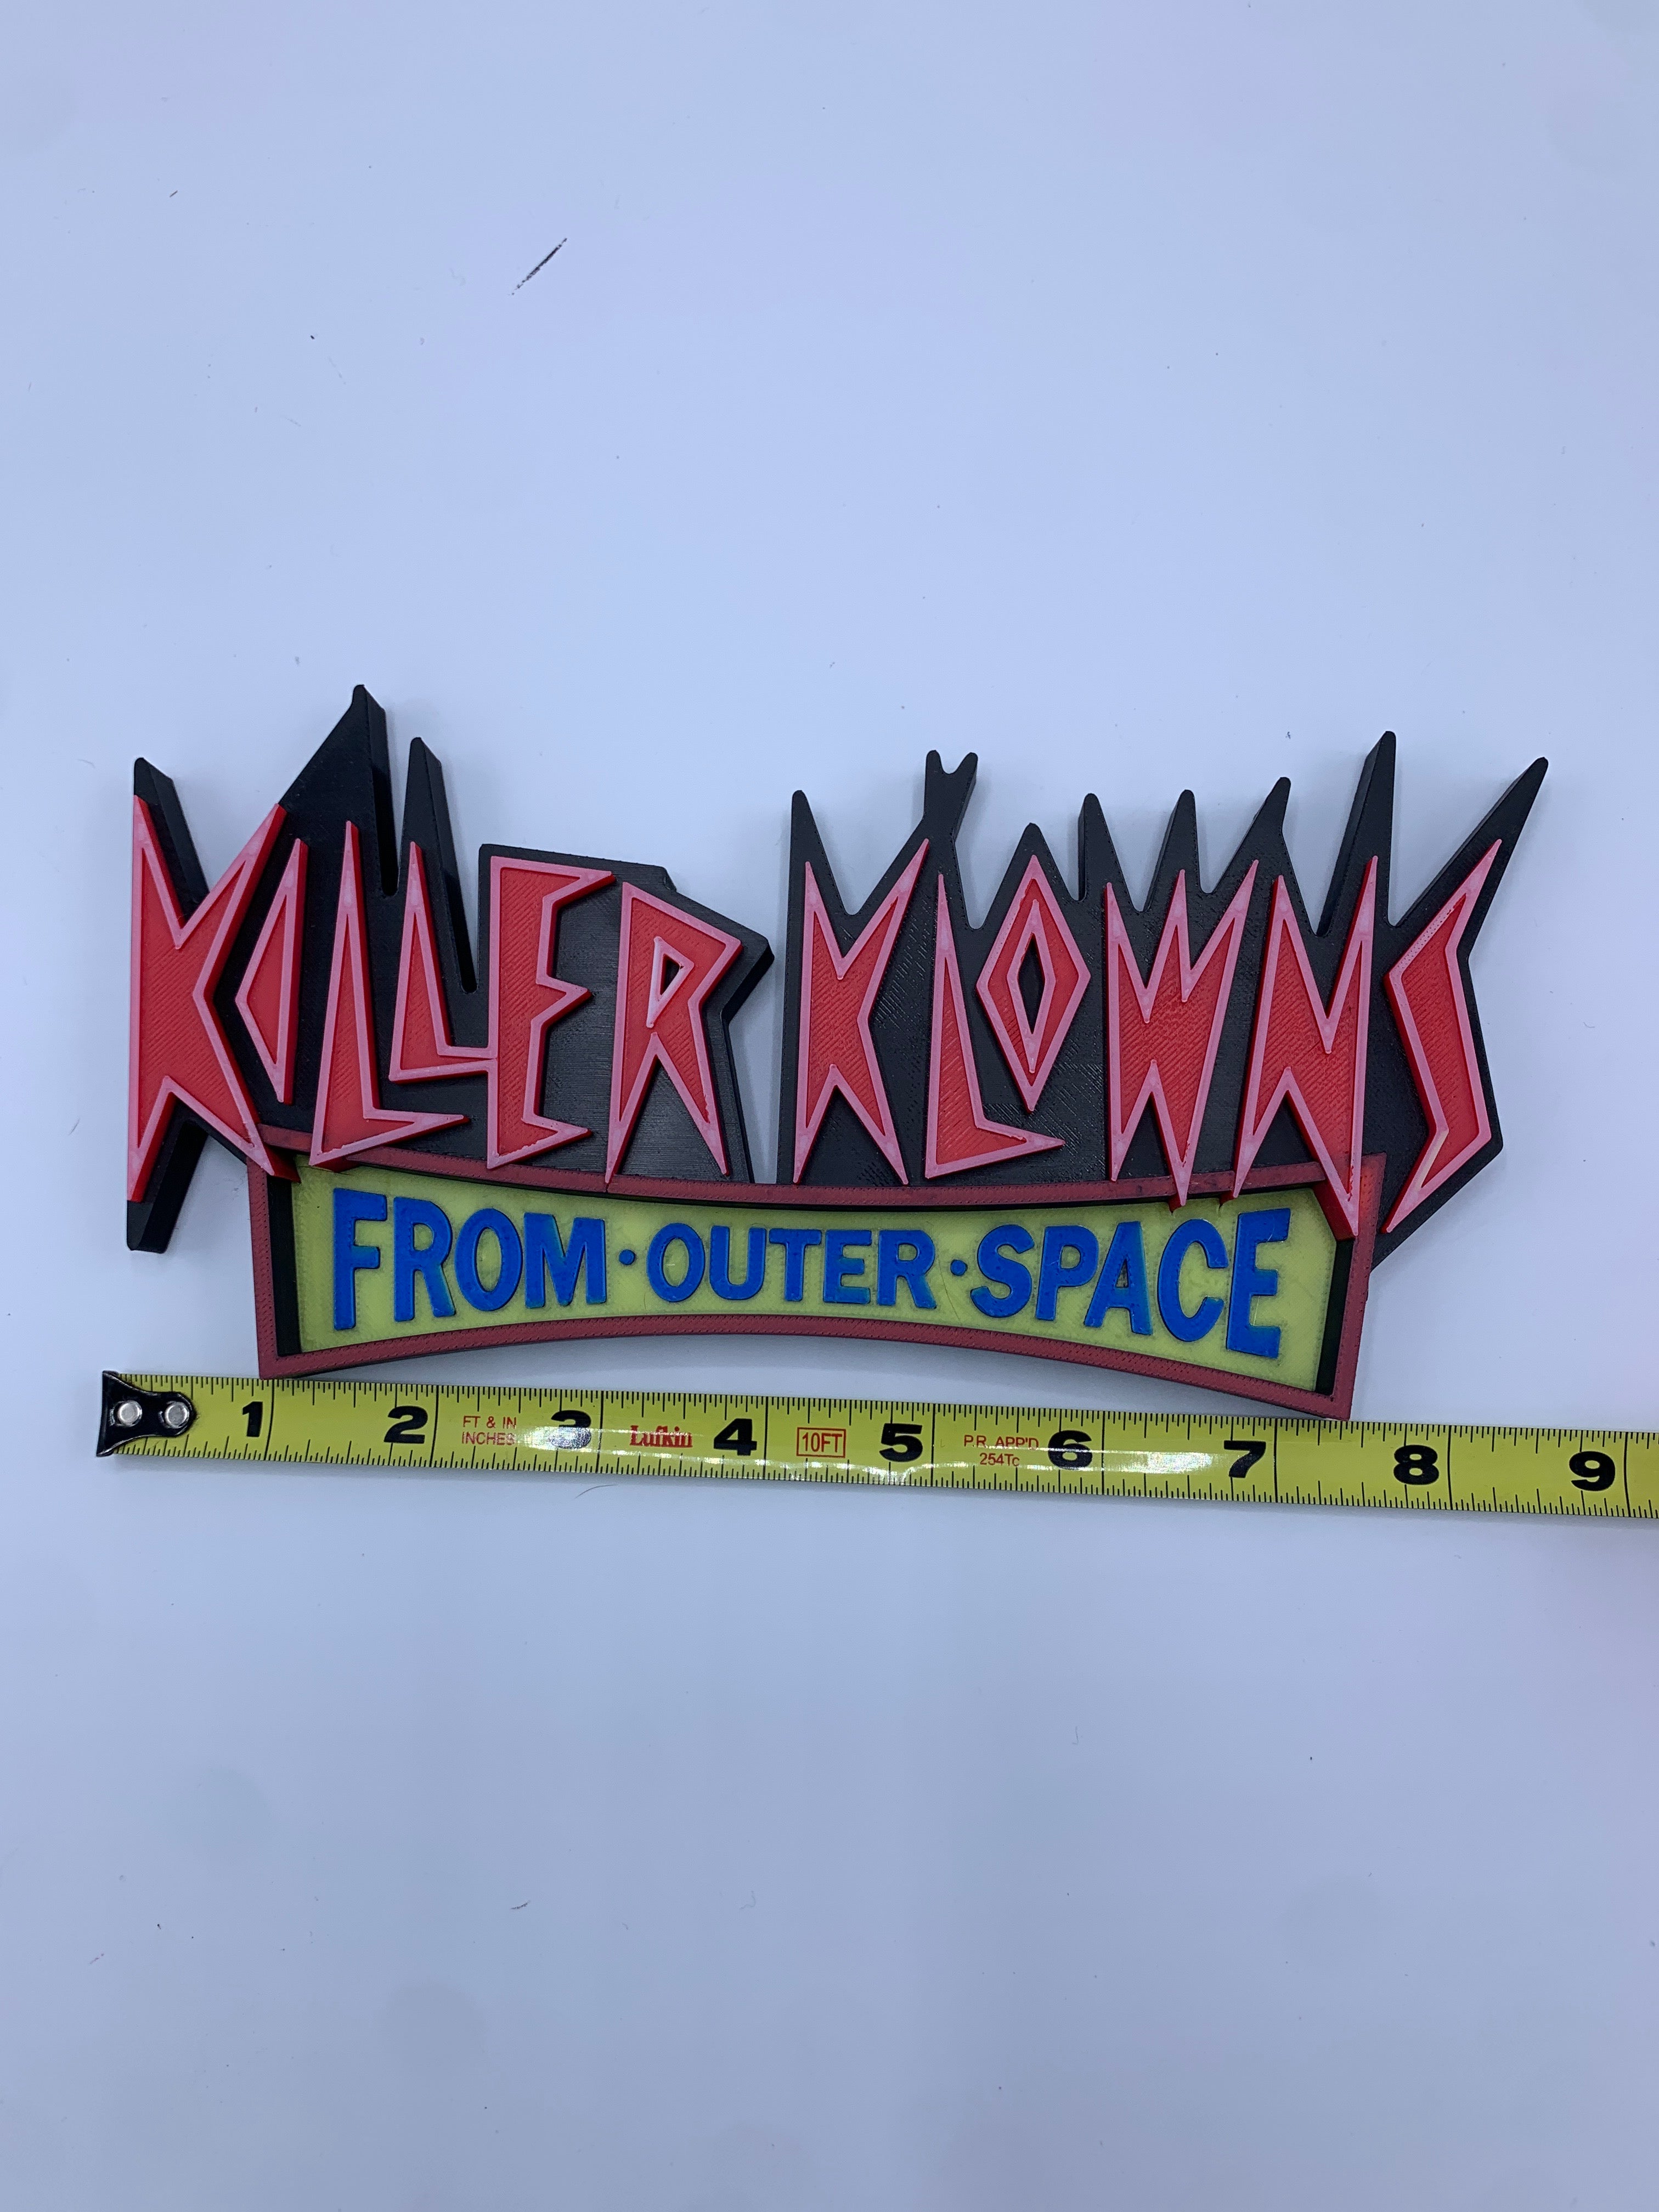 Killer Klowns from outer space sign